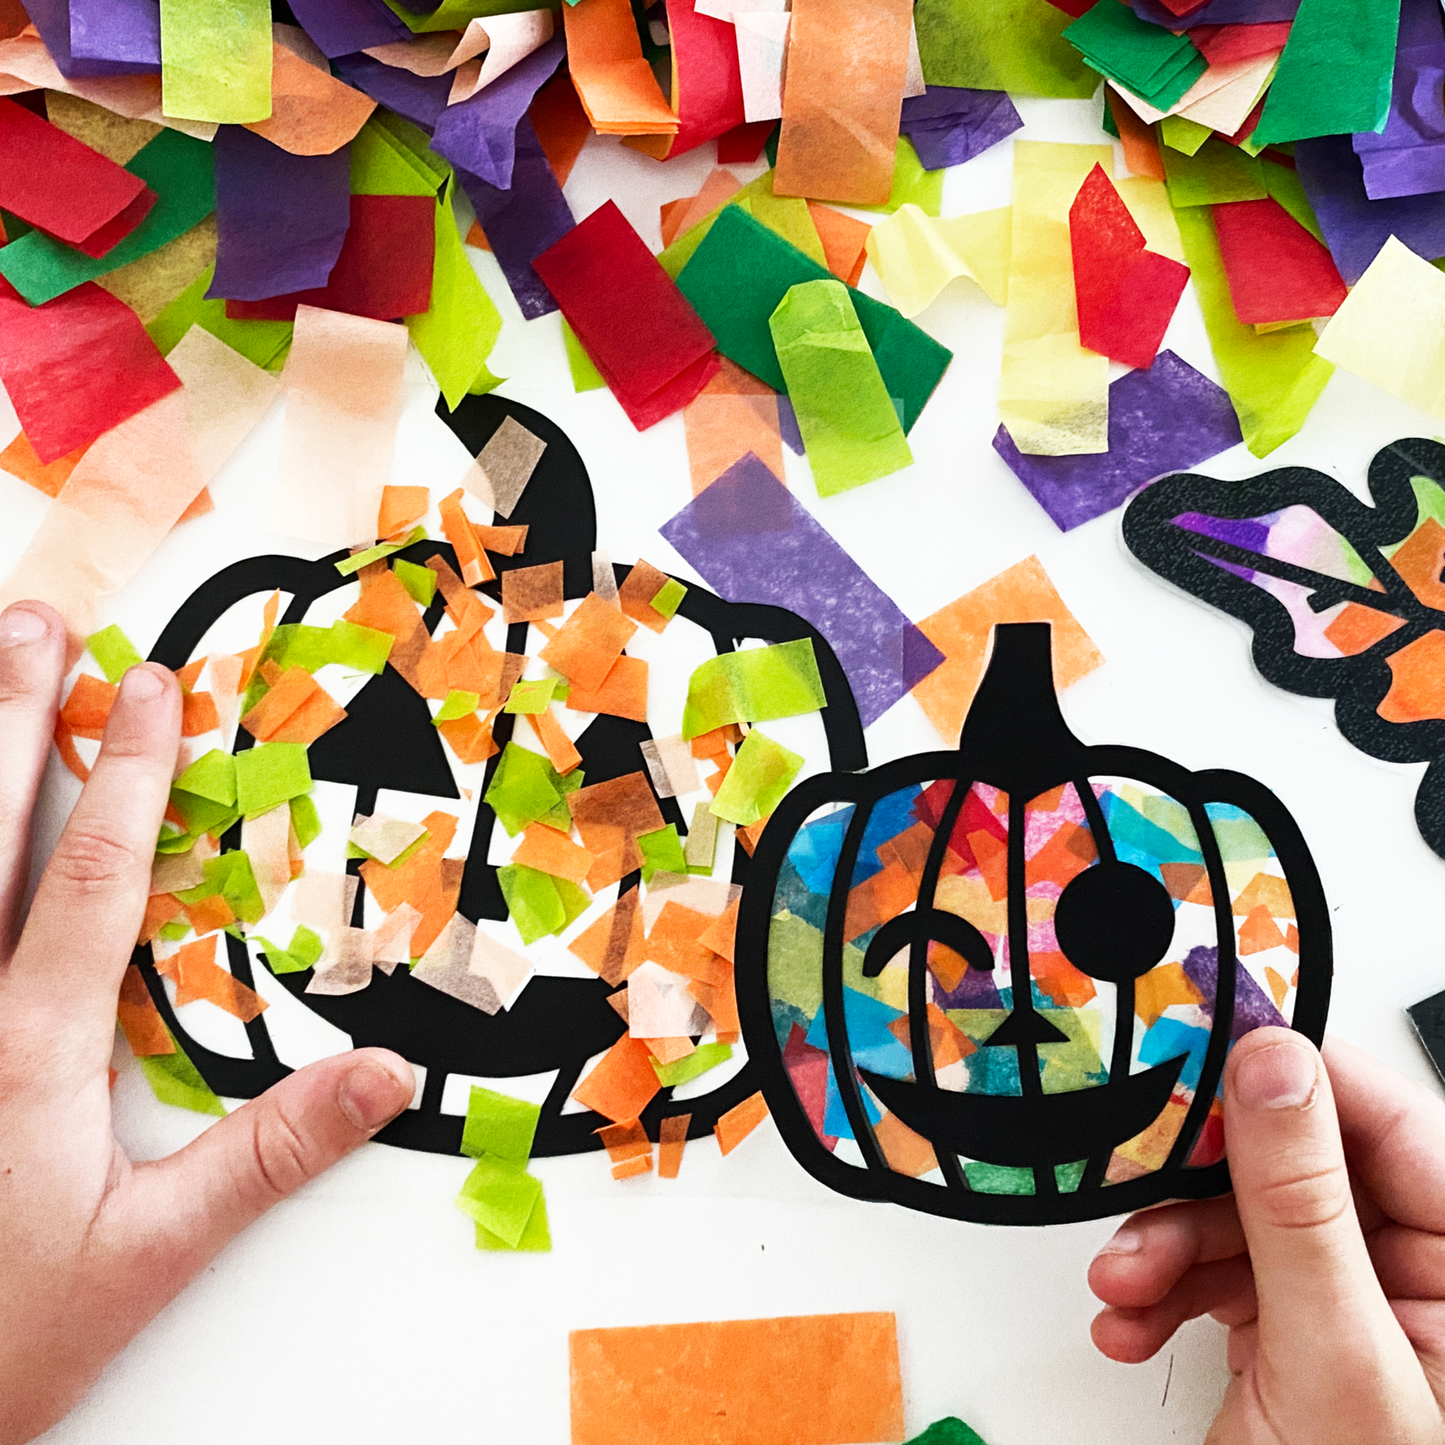 Halloween crafts for preschool activity and toddlers fall party.